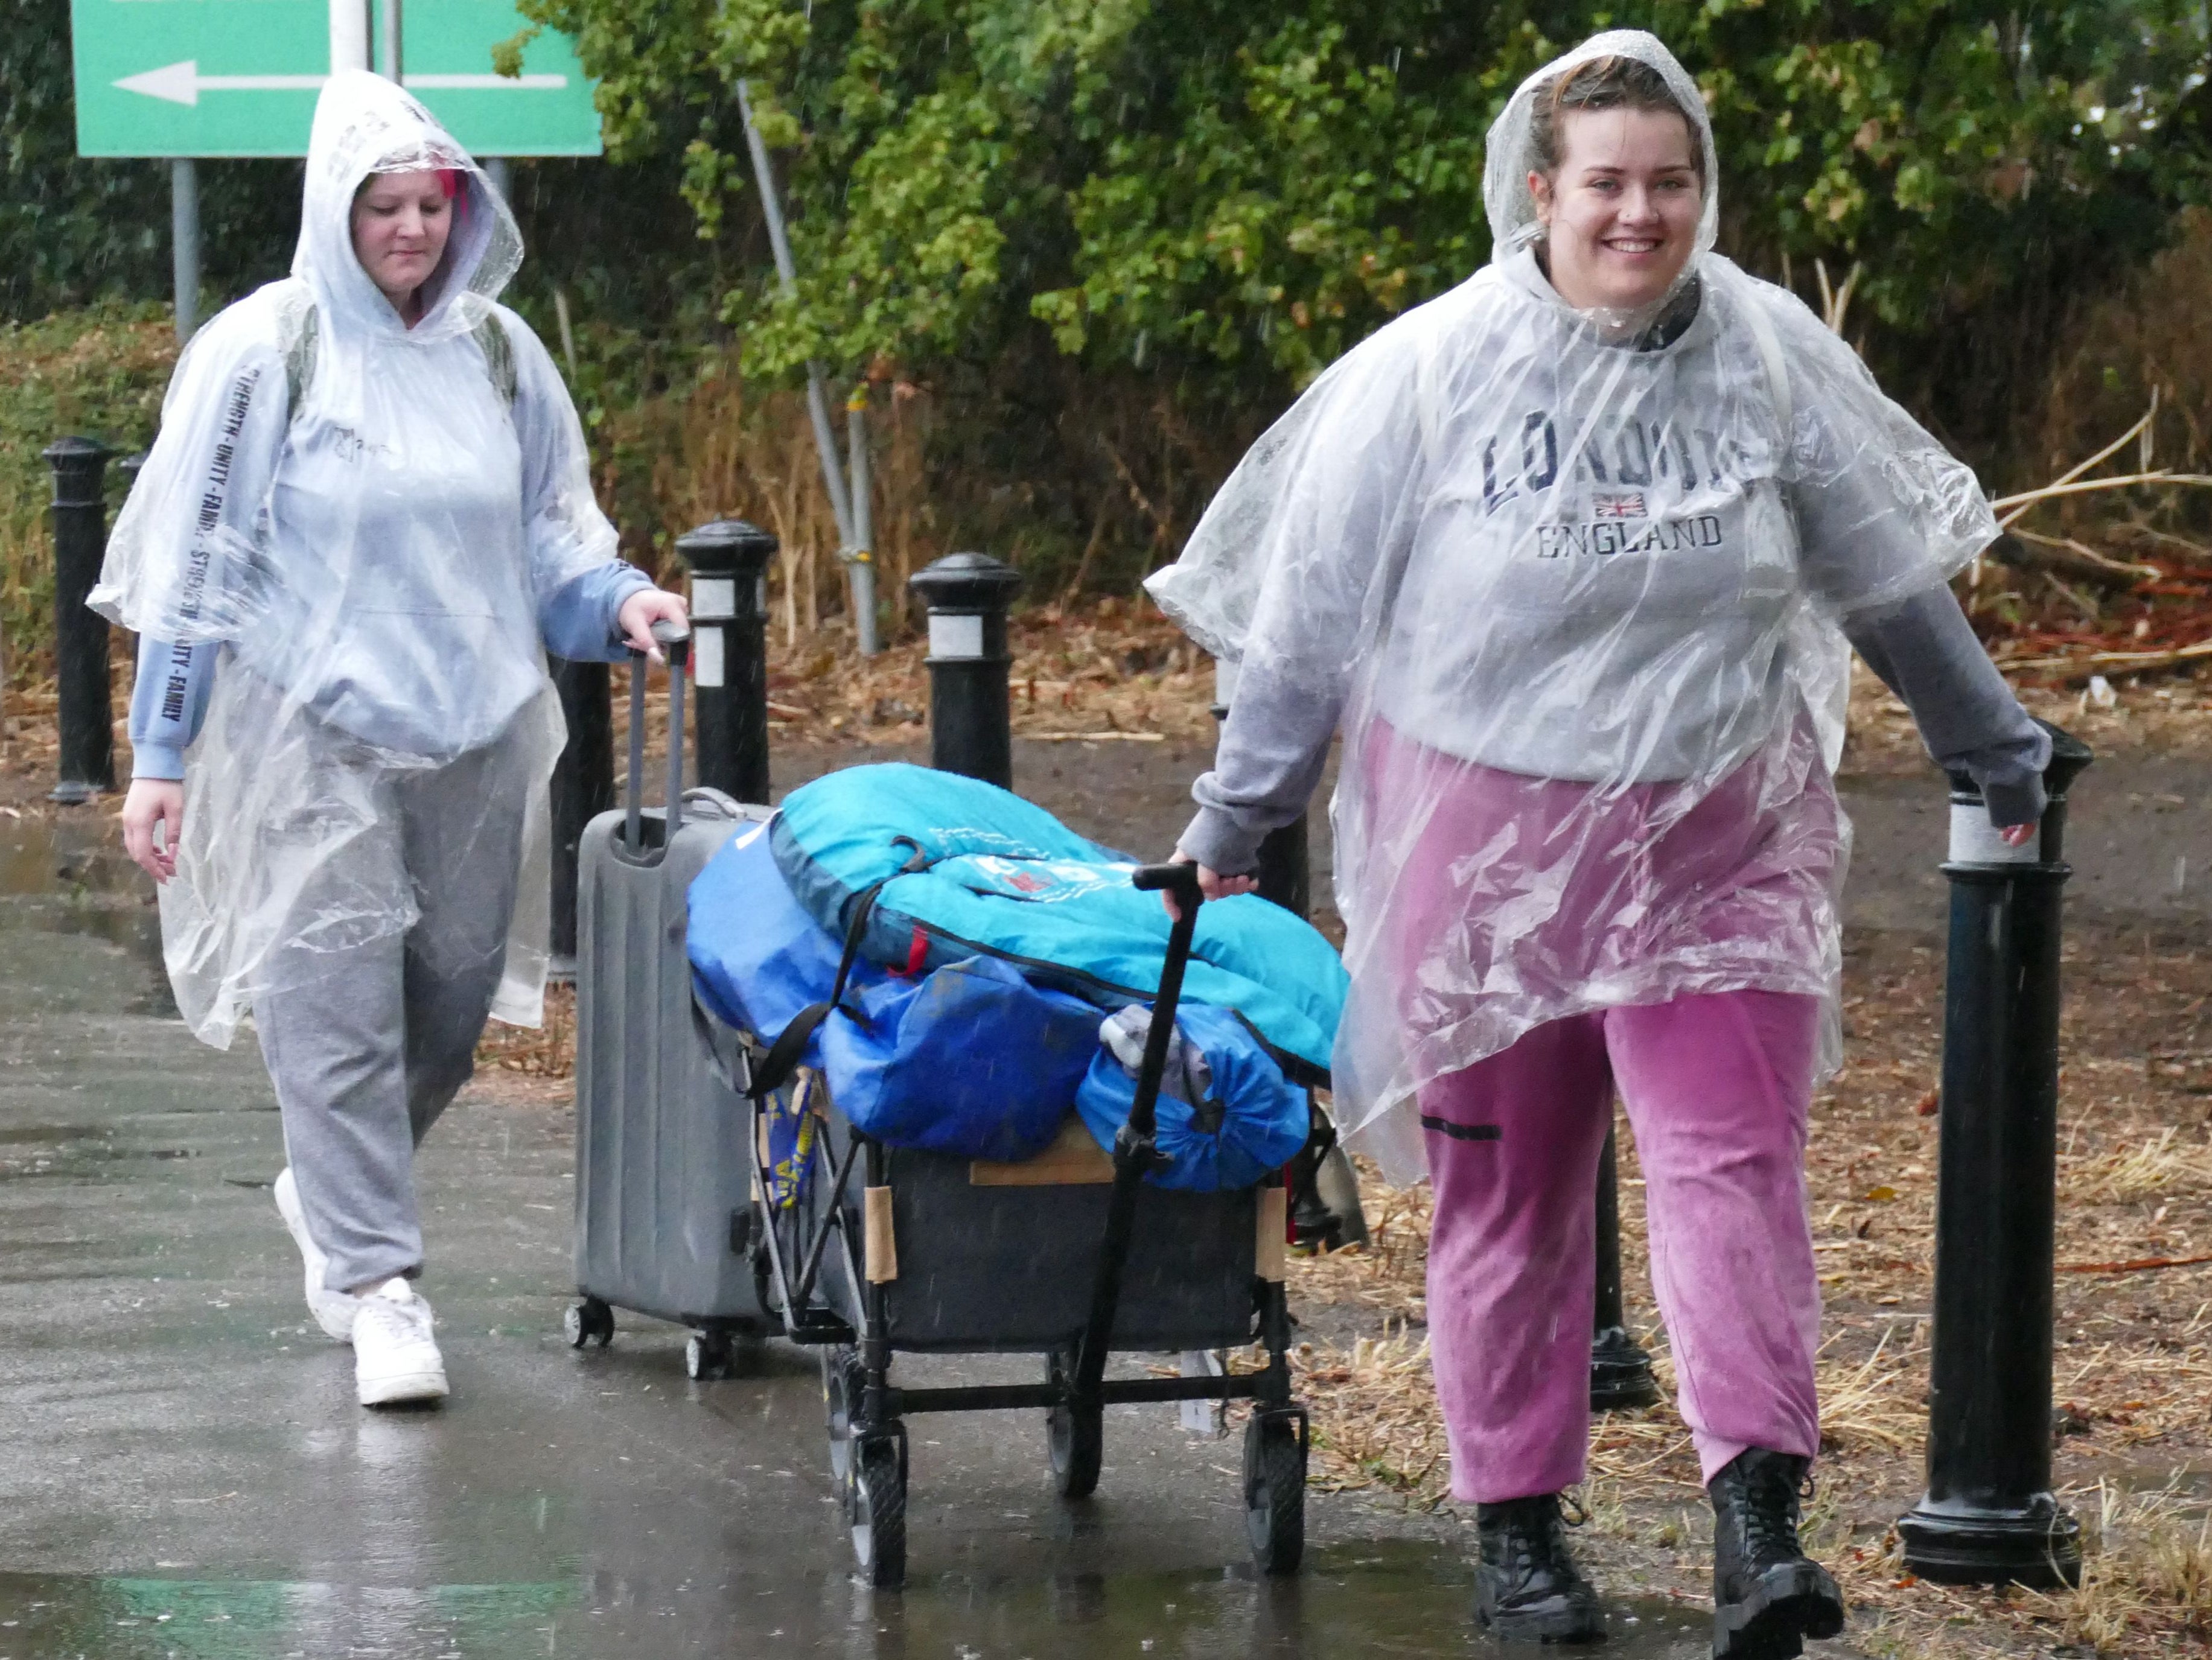 Fans arrive for the Reading festival in wet weather